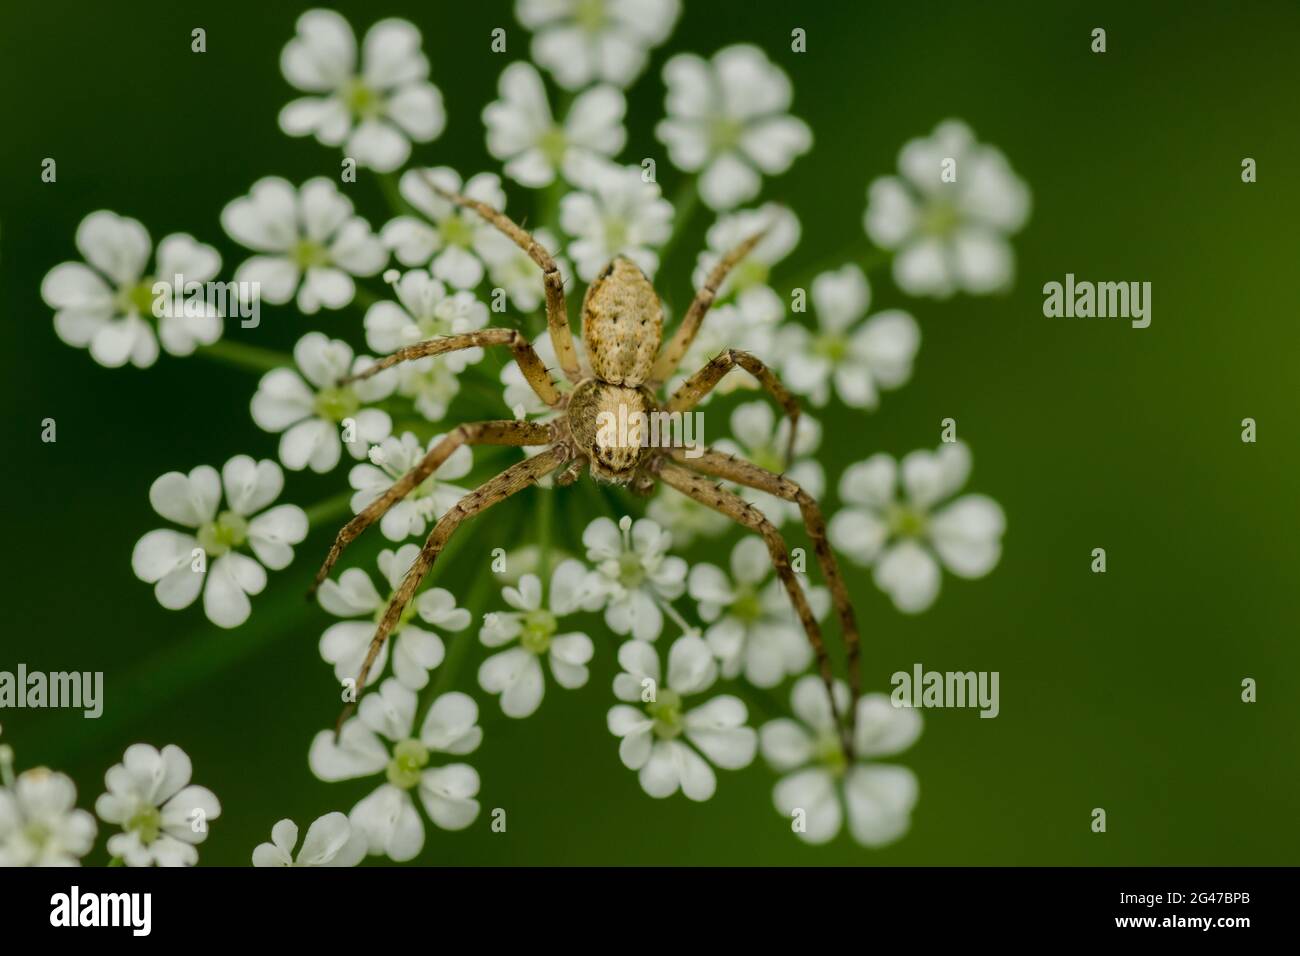 wolf spider in a macro shot sitting on the white blossoms of a wild umbellifer plant in front of a green background Stock Photo